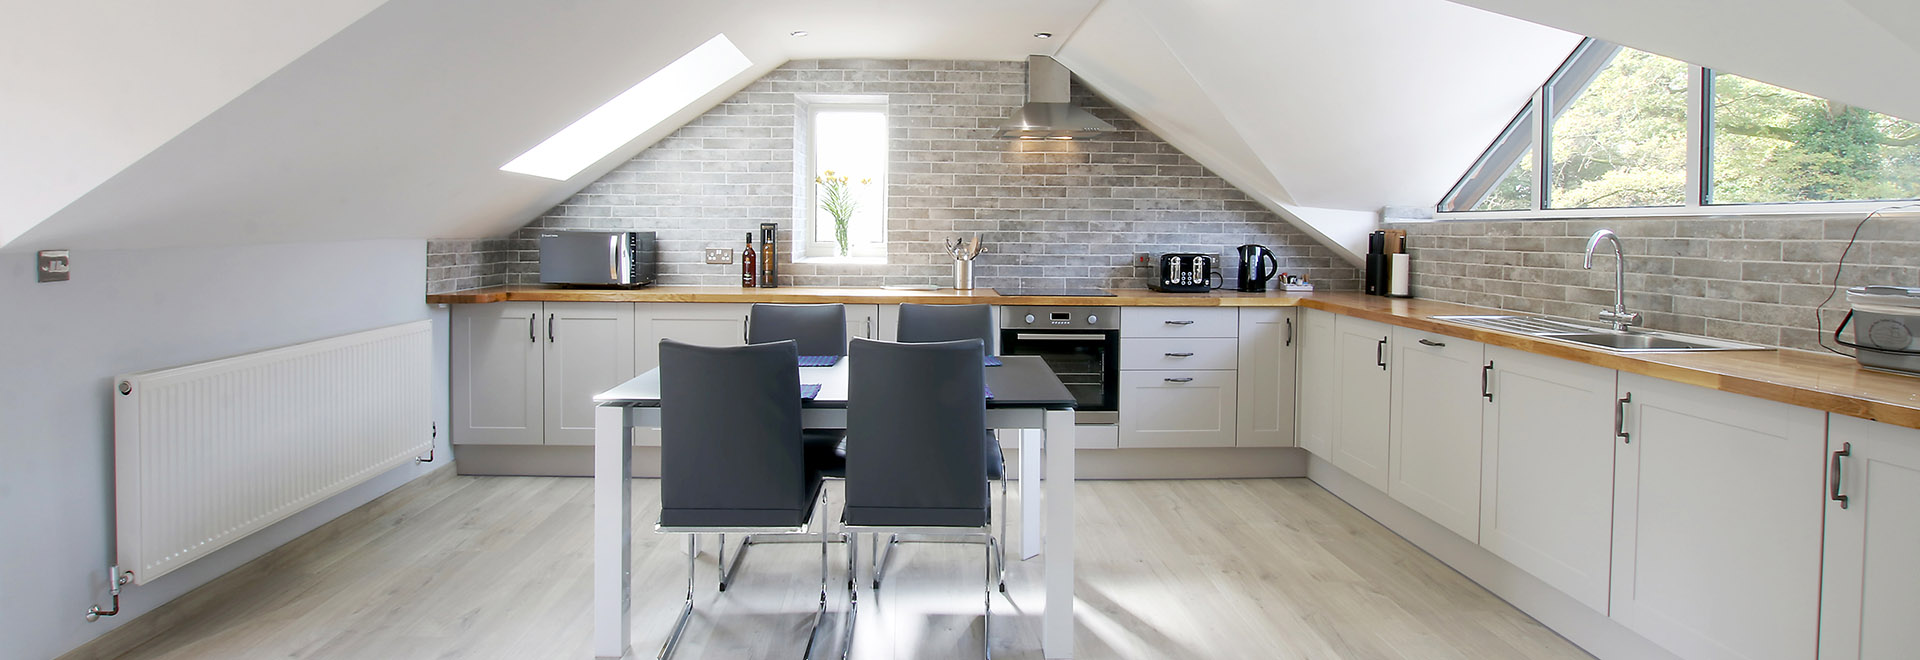 Contemporary holiday cottage kitchen